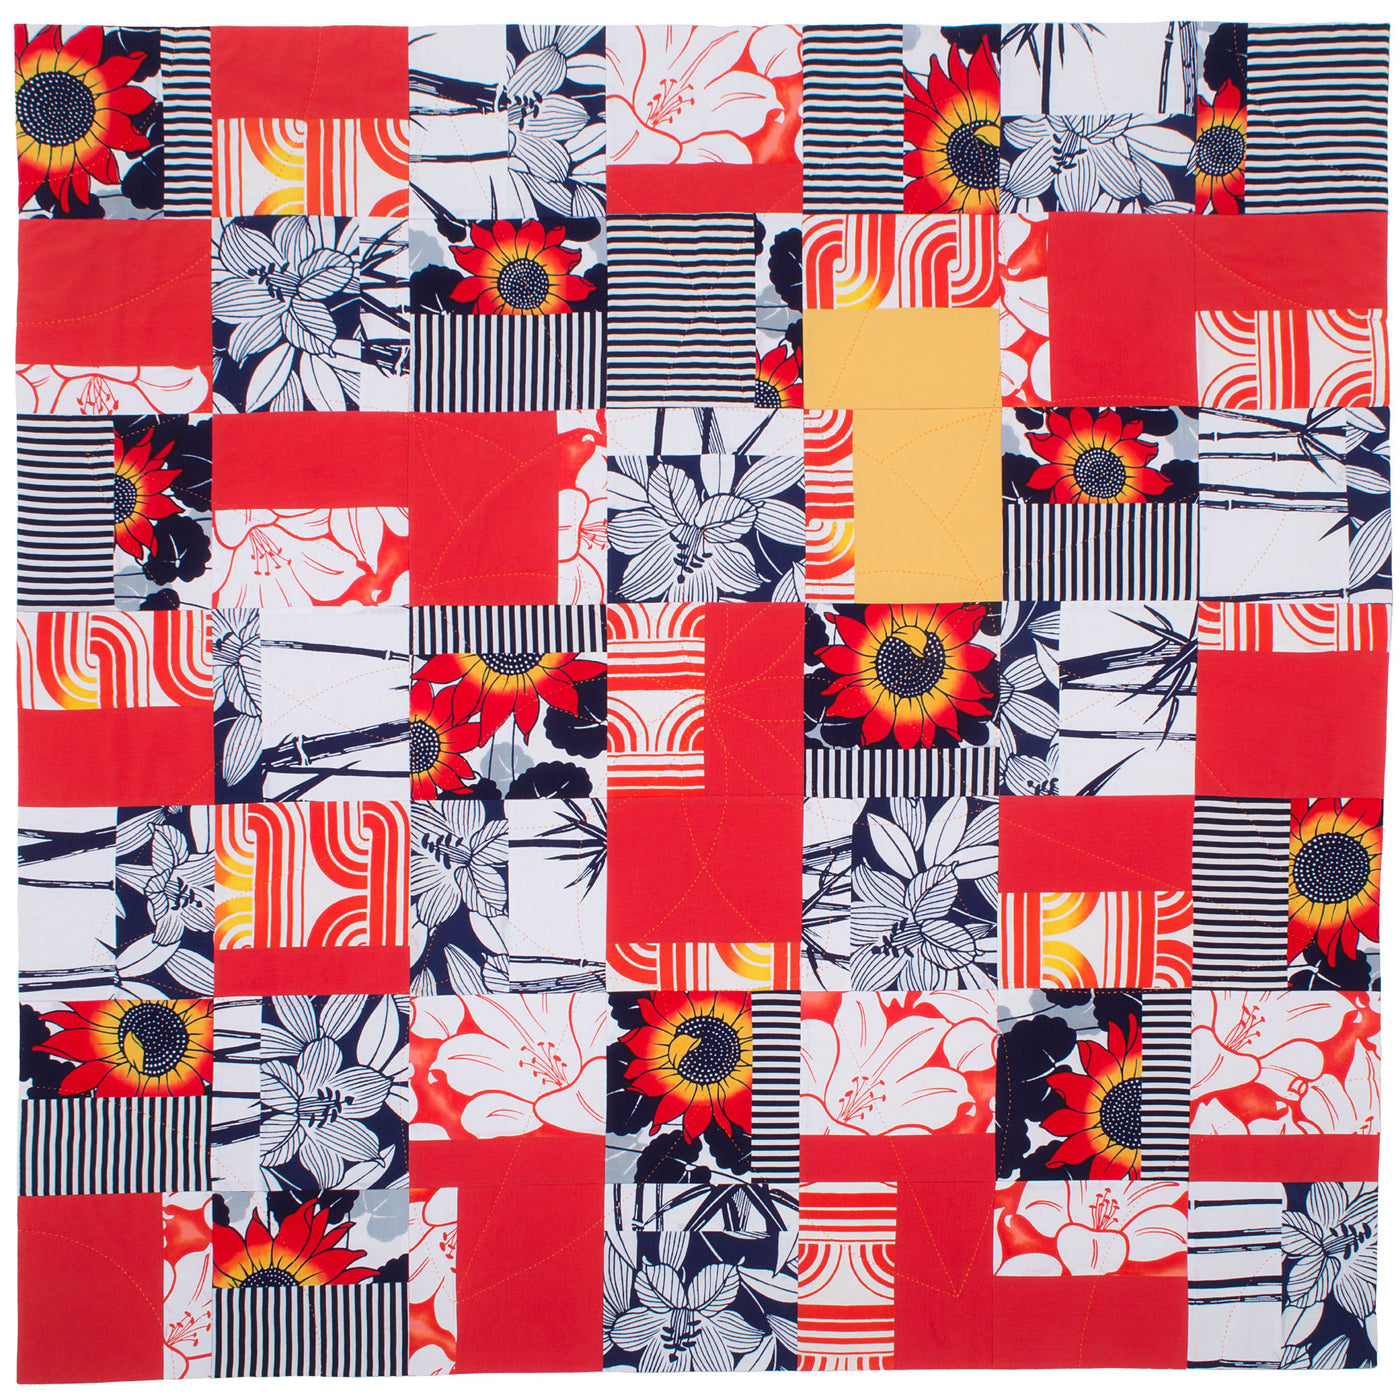 Good Fortune, a quilt by Patricia Belyea